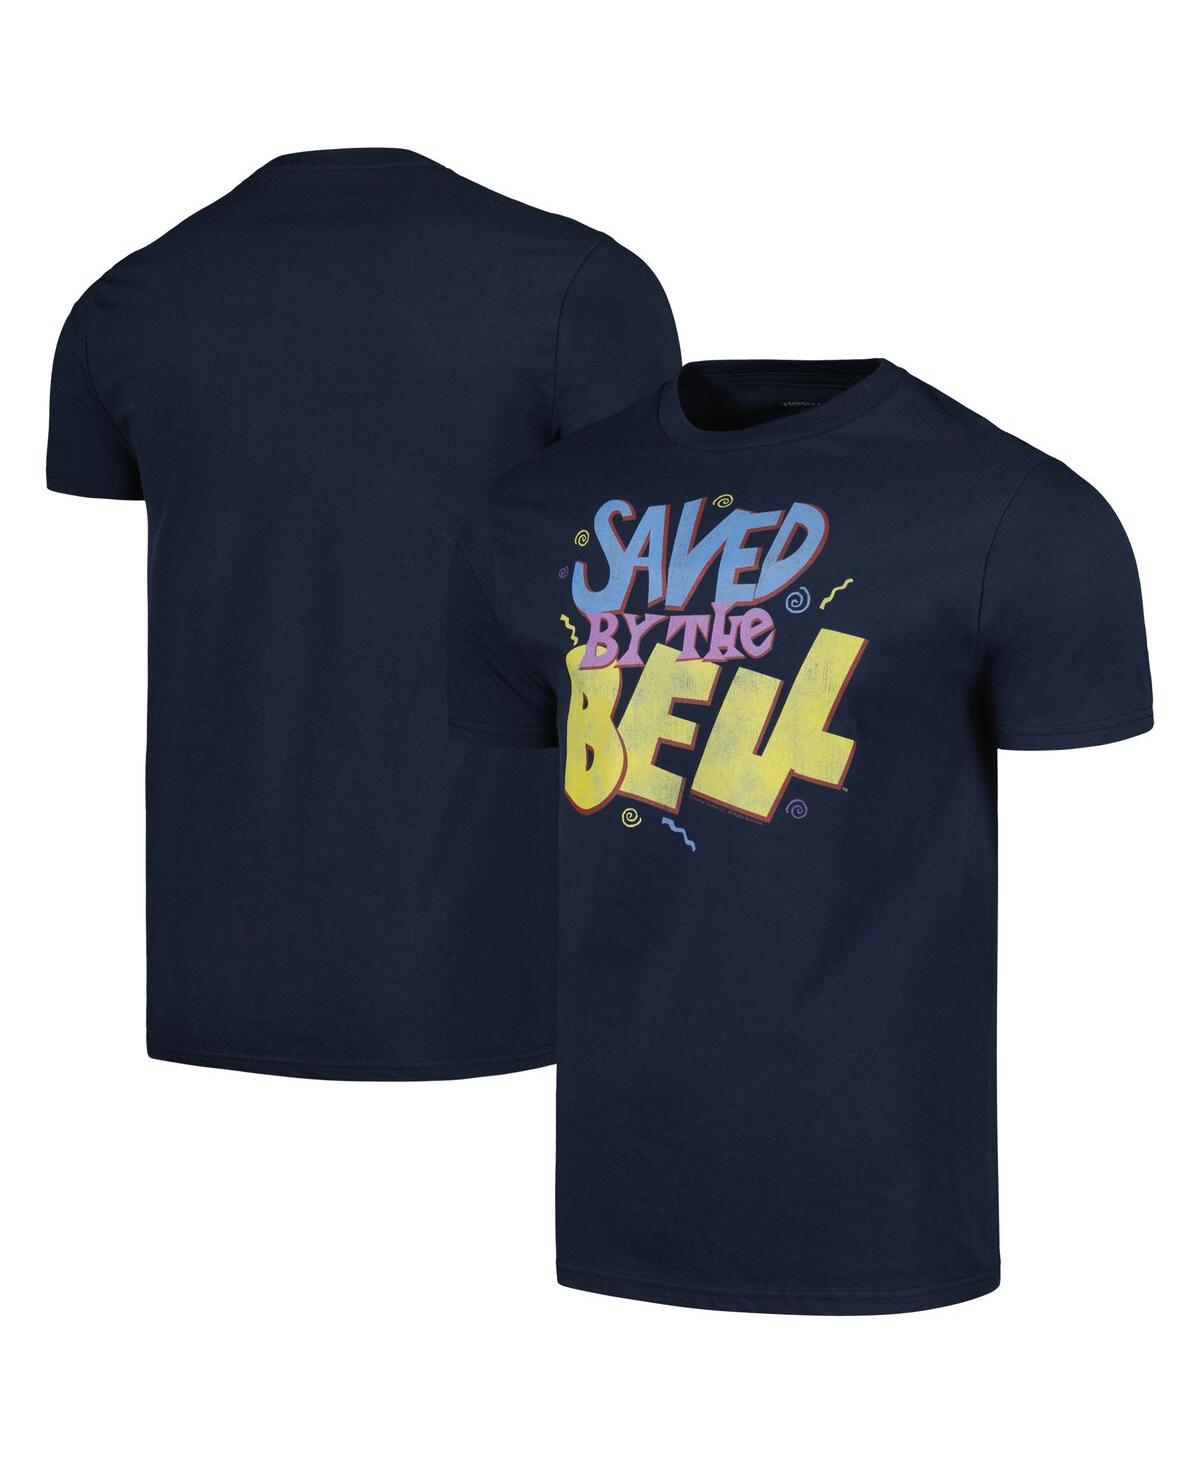 Men's Navy Saved by the Bell Faded Squiggles T-shirt - Navy